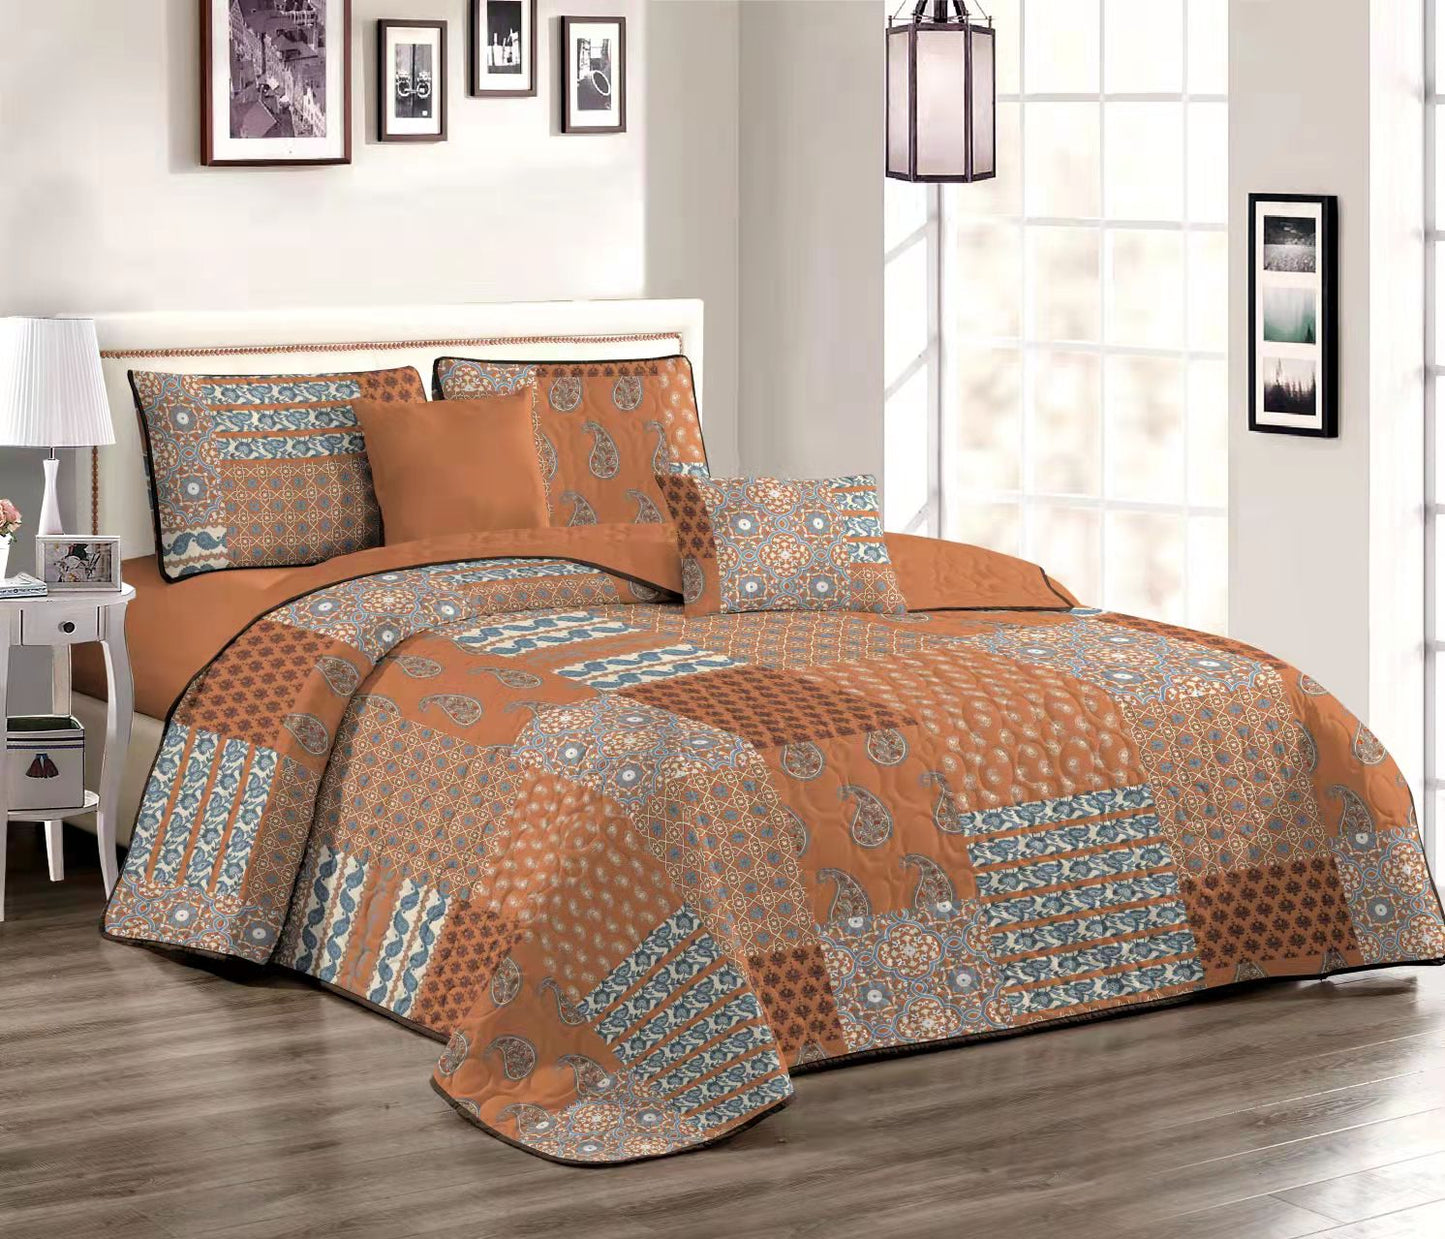 WONGS BEDDING Colorful Plaid Stitching Quilt Set With 2 Pillowcases